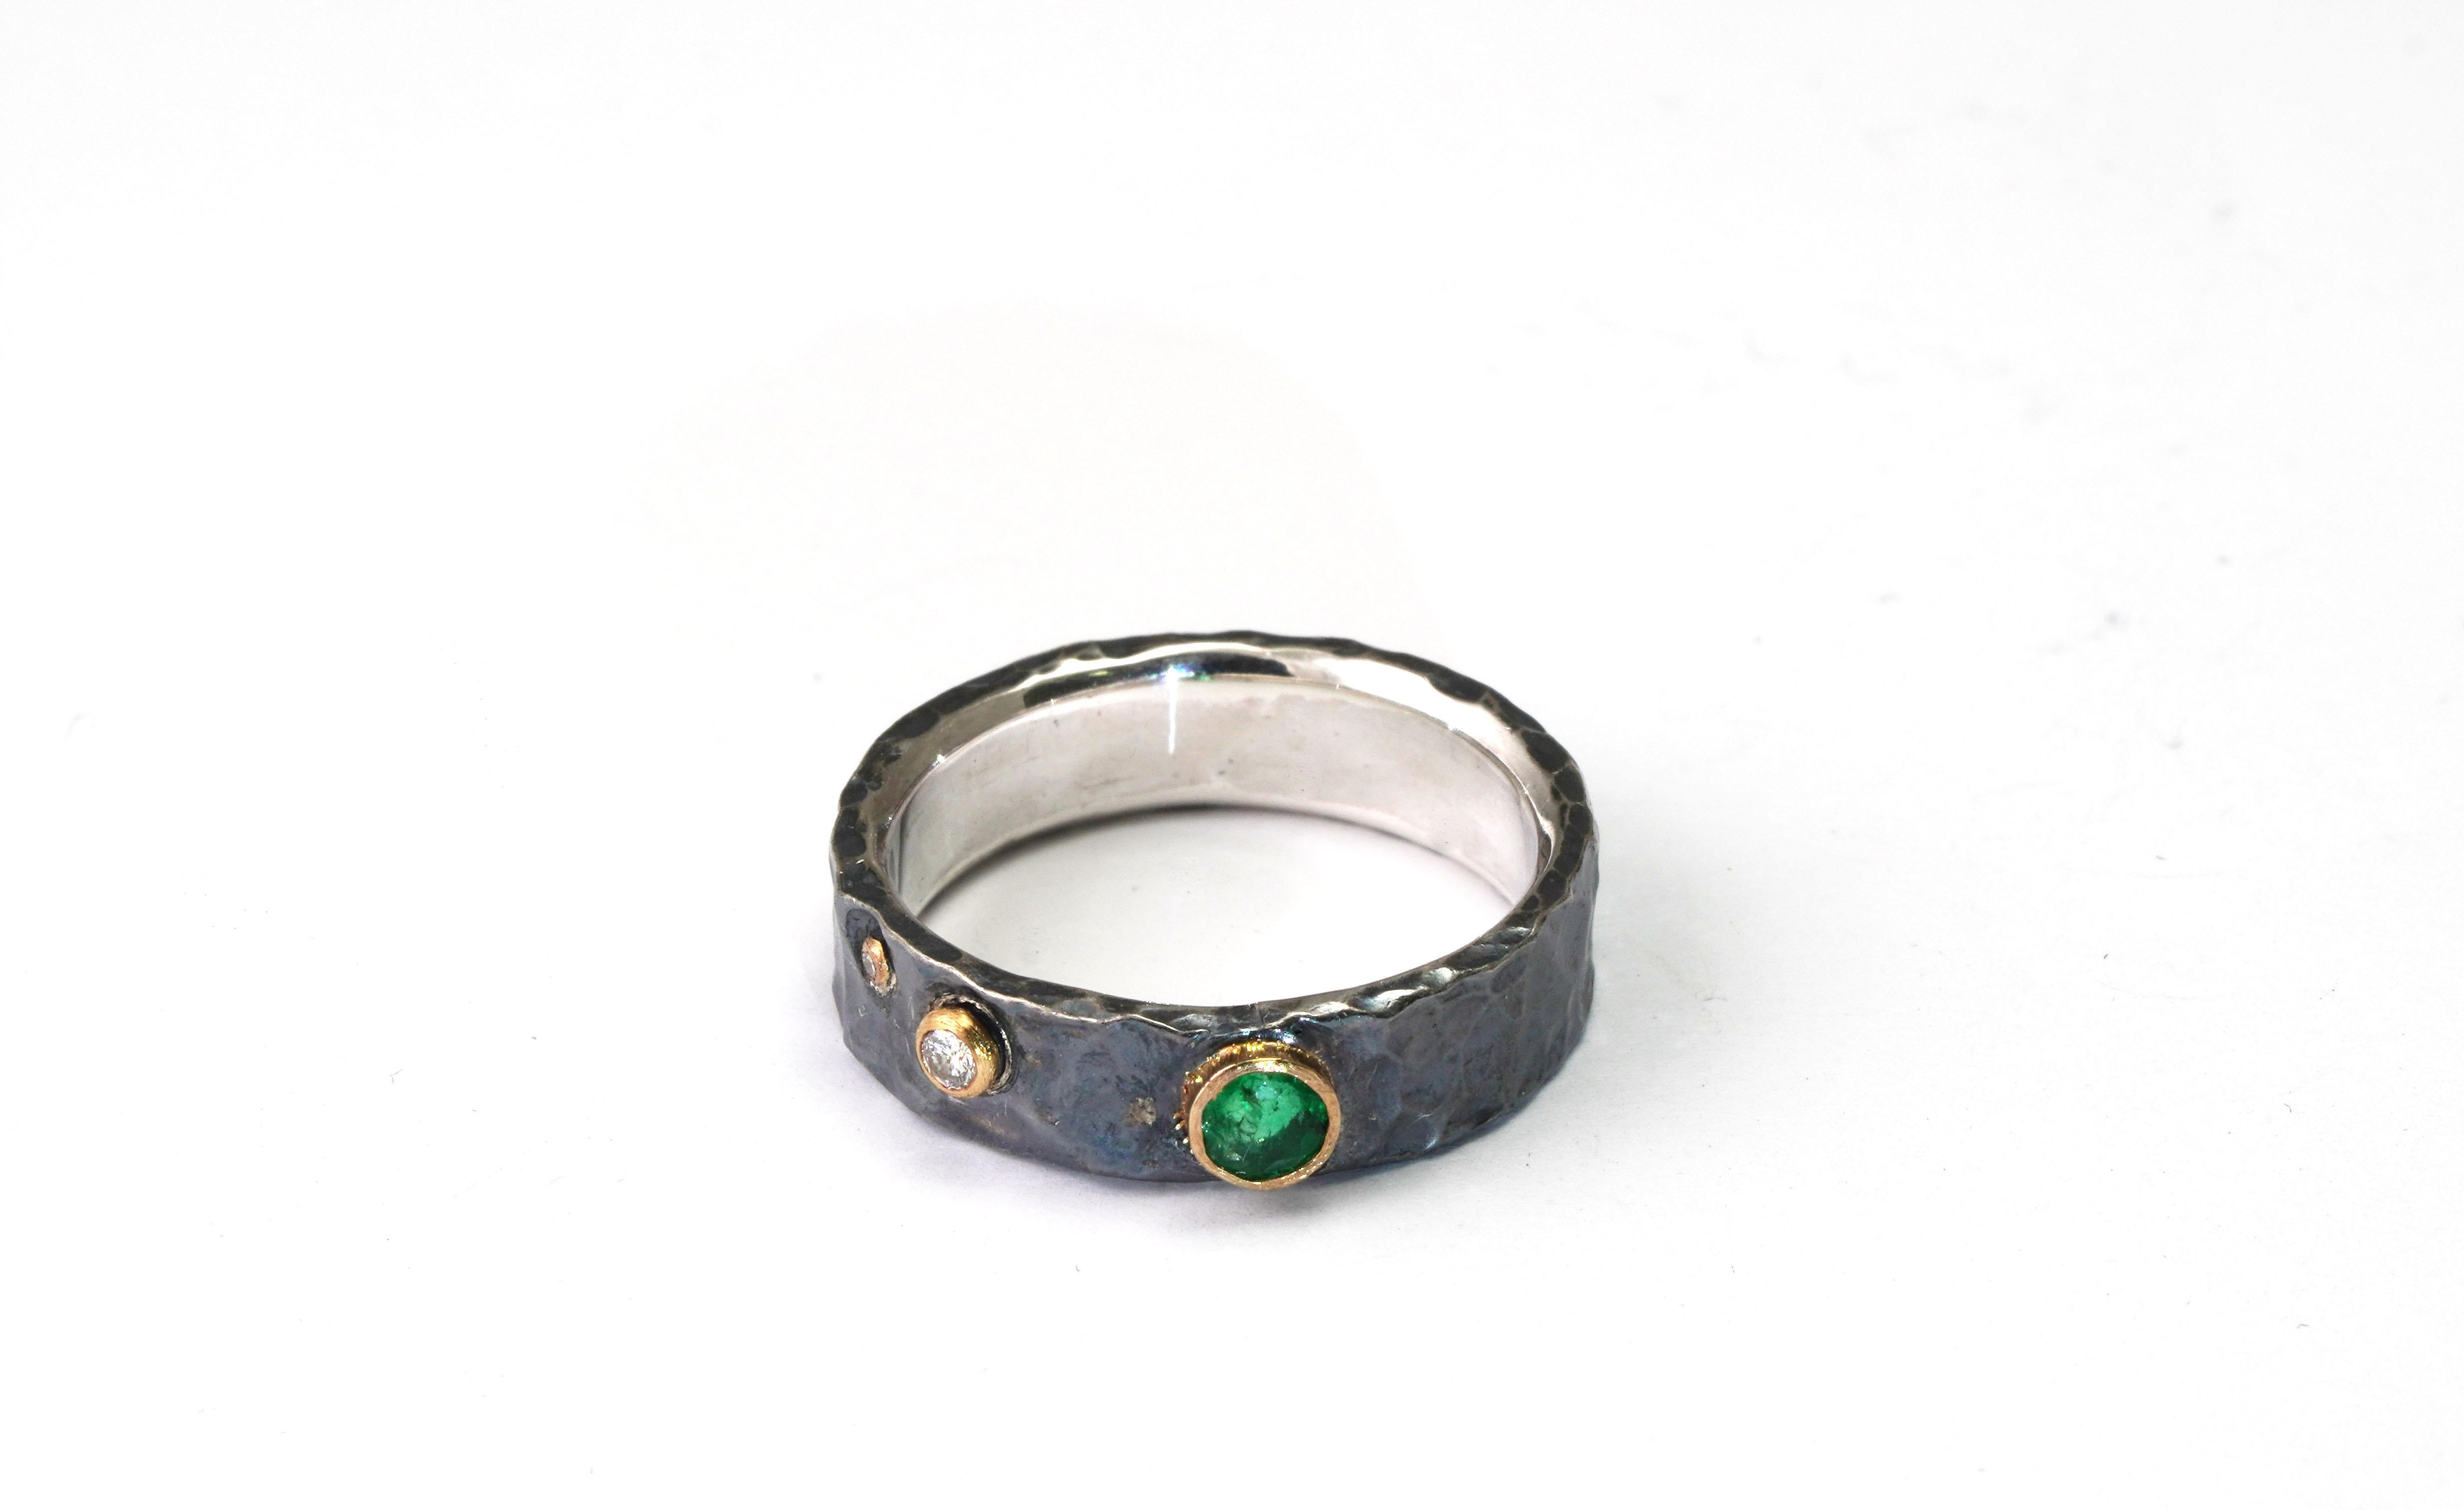 925 Oxidized Silver Ring with Emerald and Diamonds
(SOLID GOLD)
Gold kt: 22 
Gold color: Yellow
Ring size: 5 1/2 US
Total weight: 4.03 grams

Set with:
- Emerald
Cut: Mixed
Total weight: 0.15 carat
Color: Green
- Diamonds
Cut: Brilliant
Total